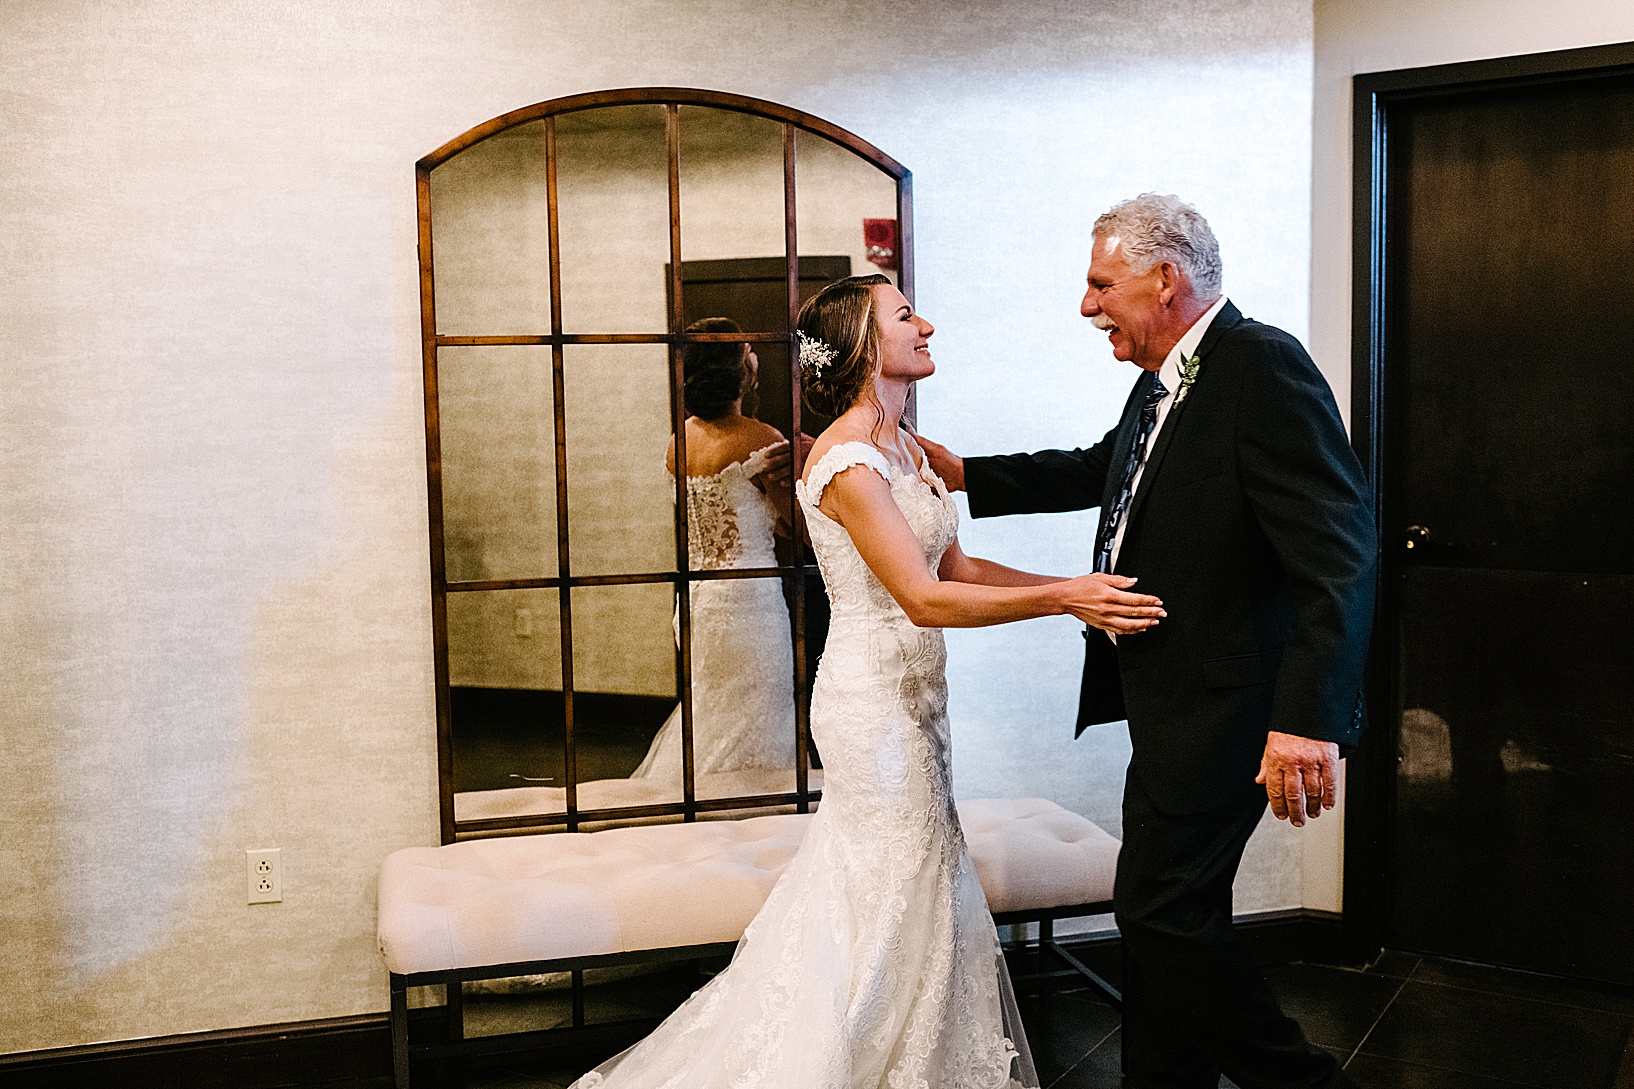 Father of the bride and bride going to hug as he sees her for the first time